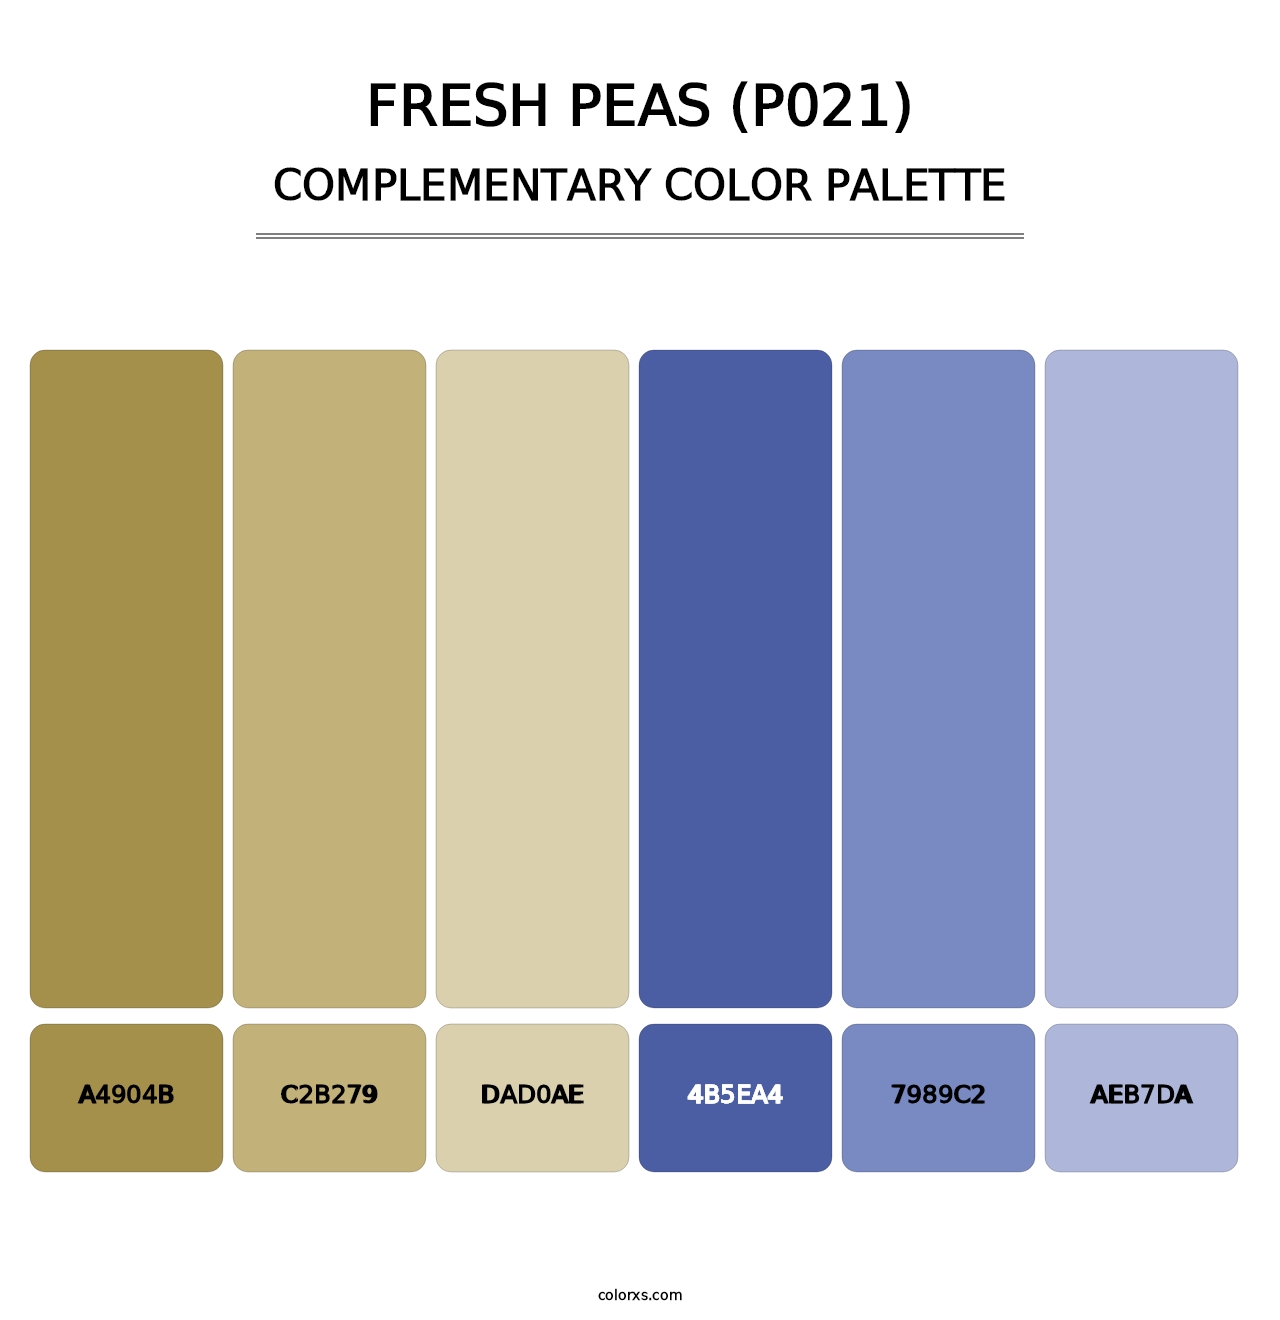 Fresh Peas (P021) - Complementary Color Palette